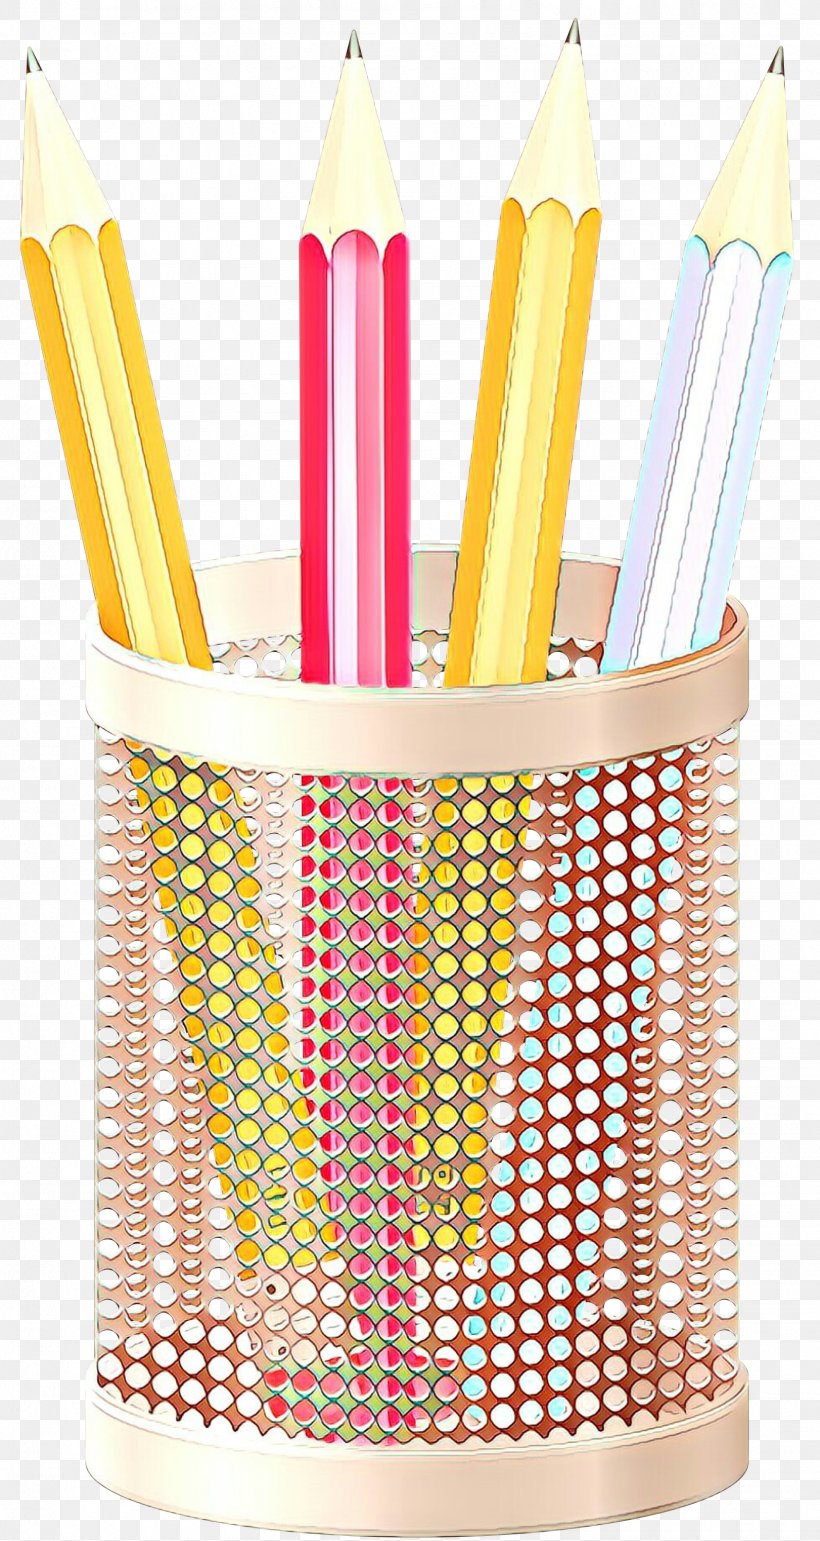 Drinking Straw Pencil Straw Writing Implement Office Supplies, PNG, 1595x2999px, Cartoon, Drinking Straw, Office Supplies, Pencil, Straw Download Free